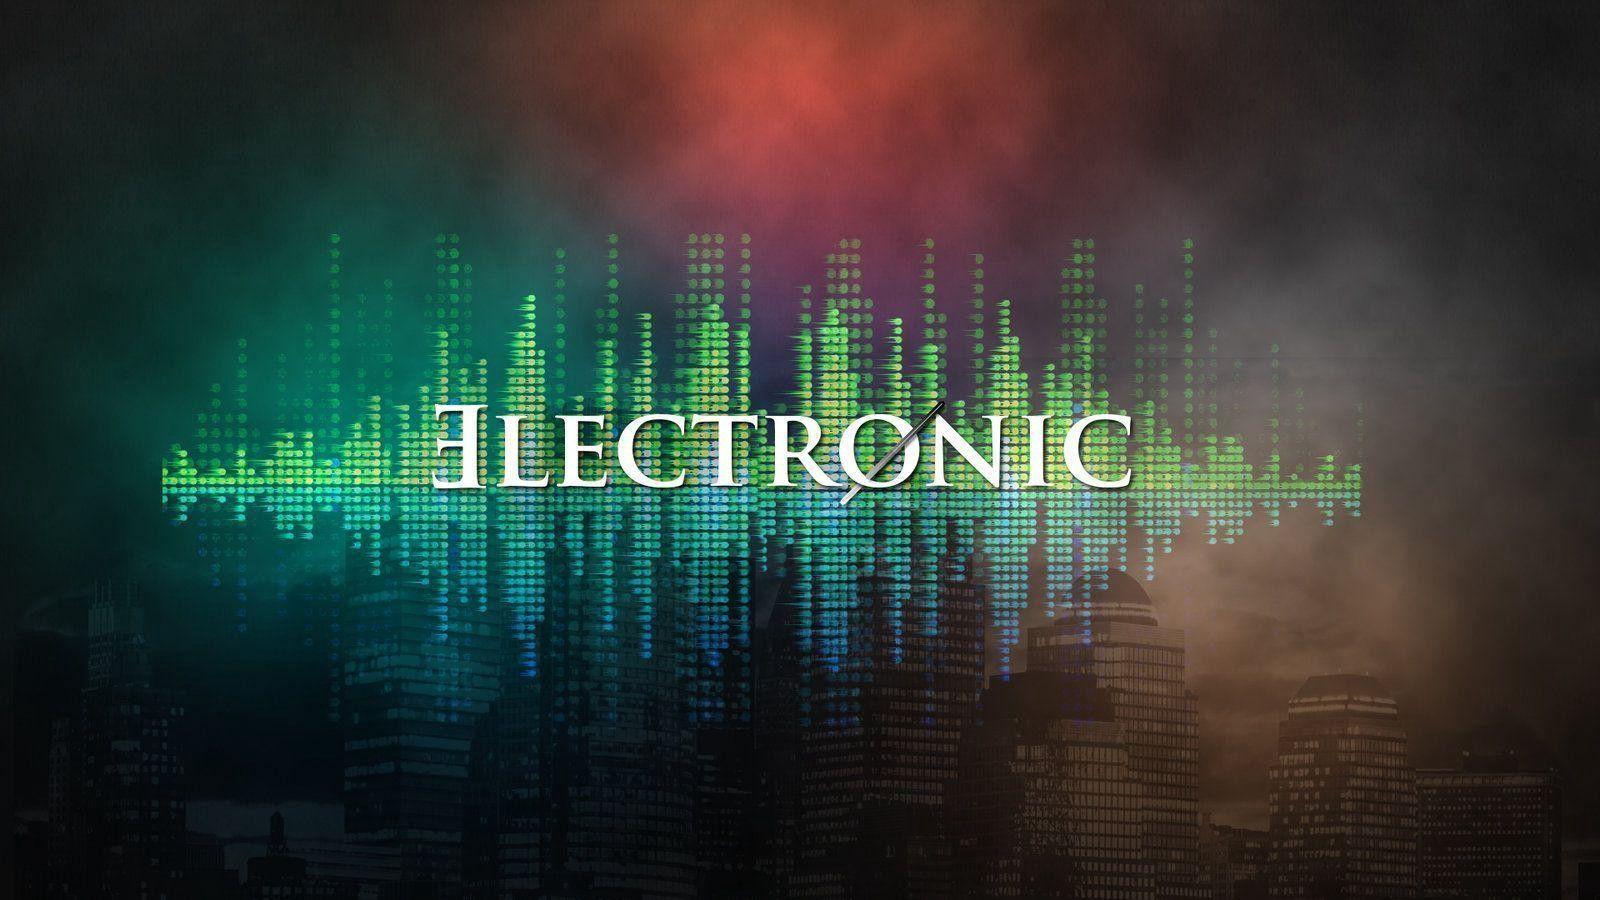 Electronic Music the new church of this generation